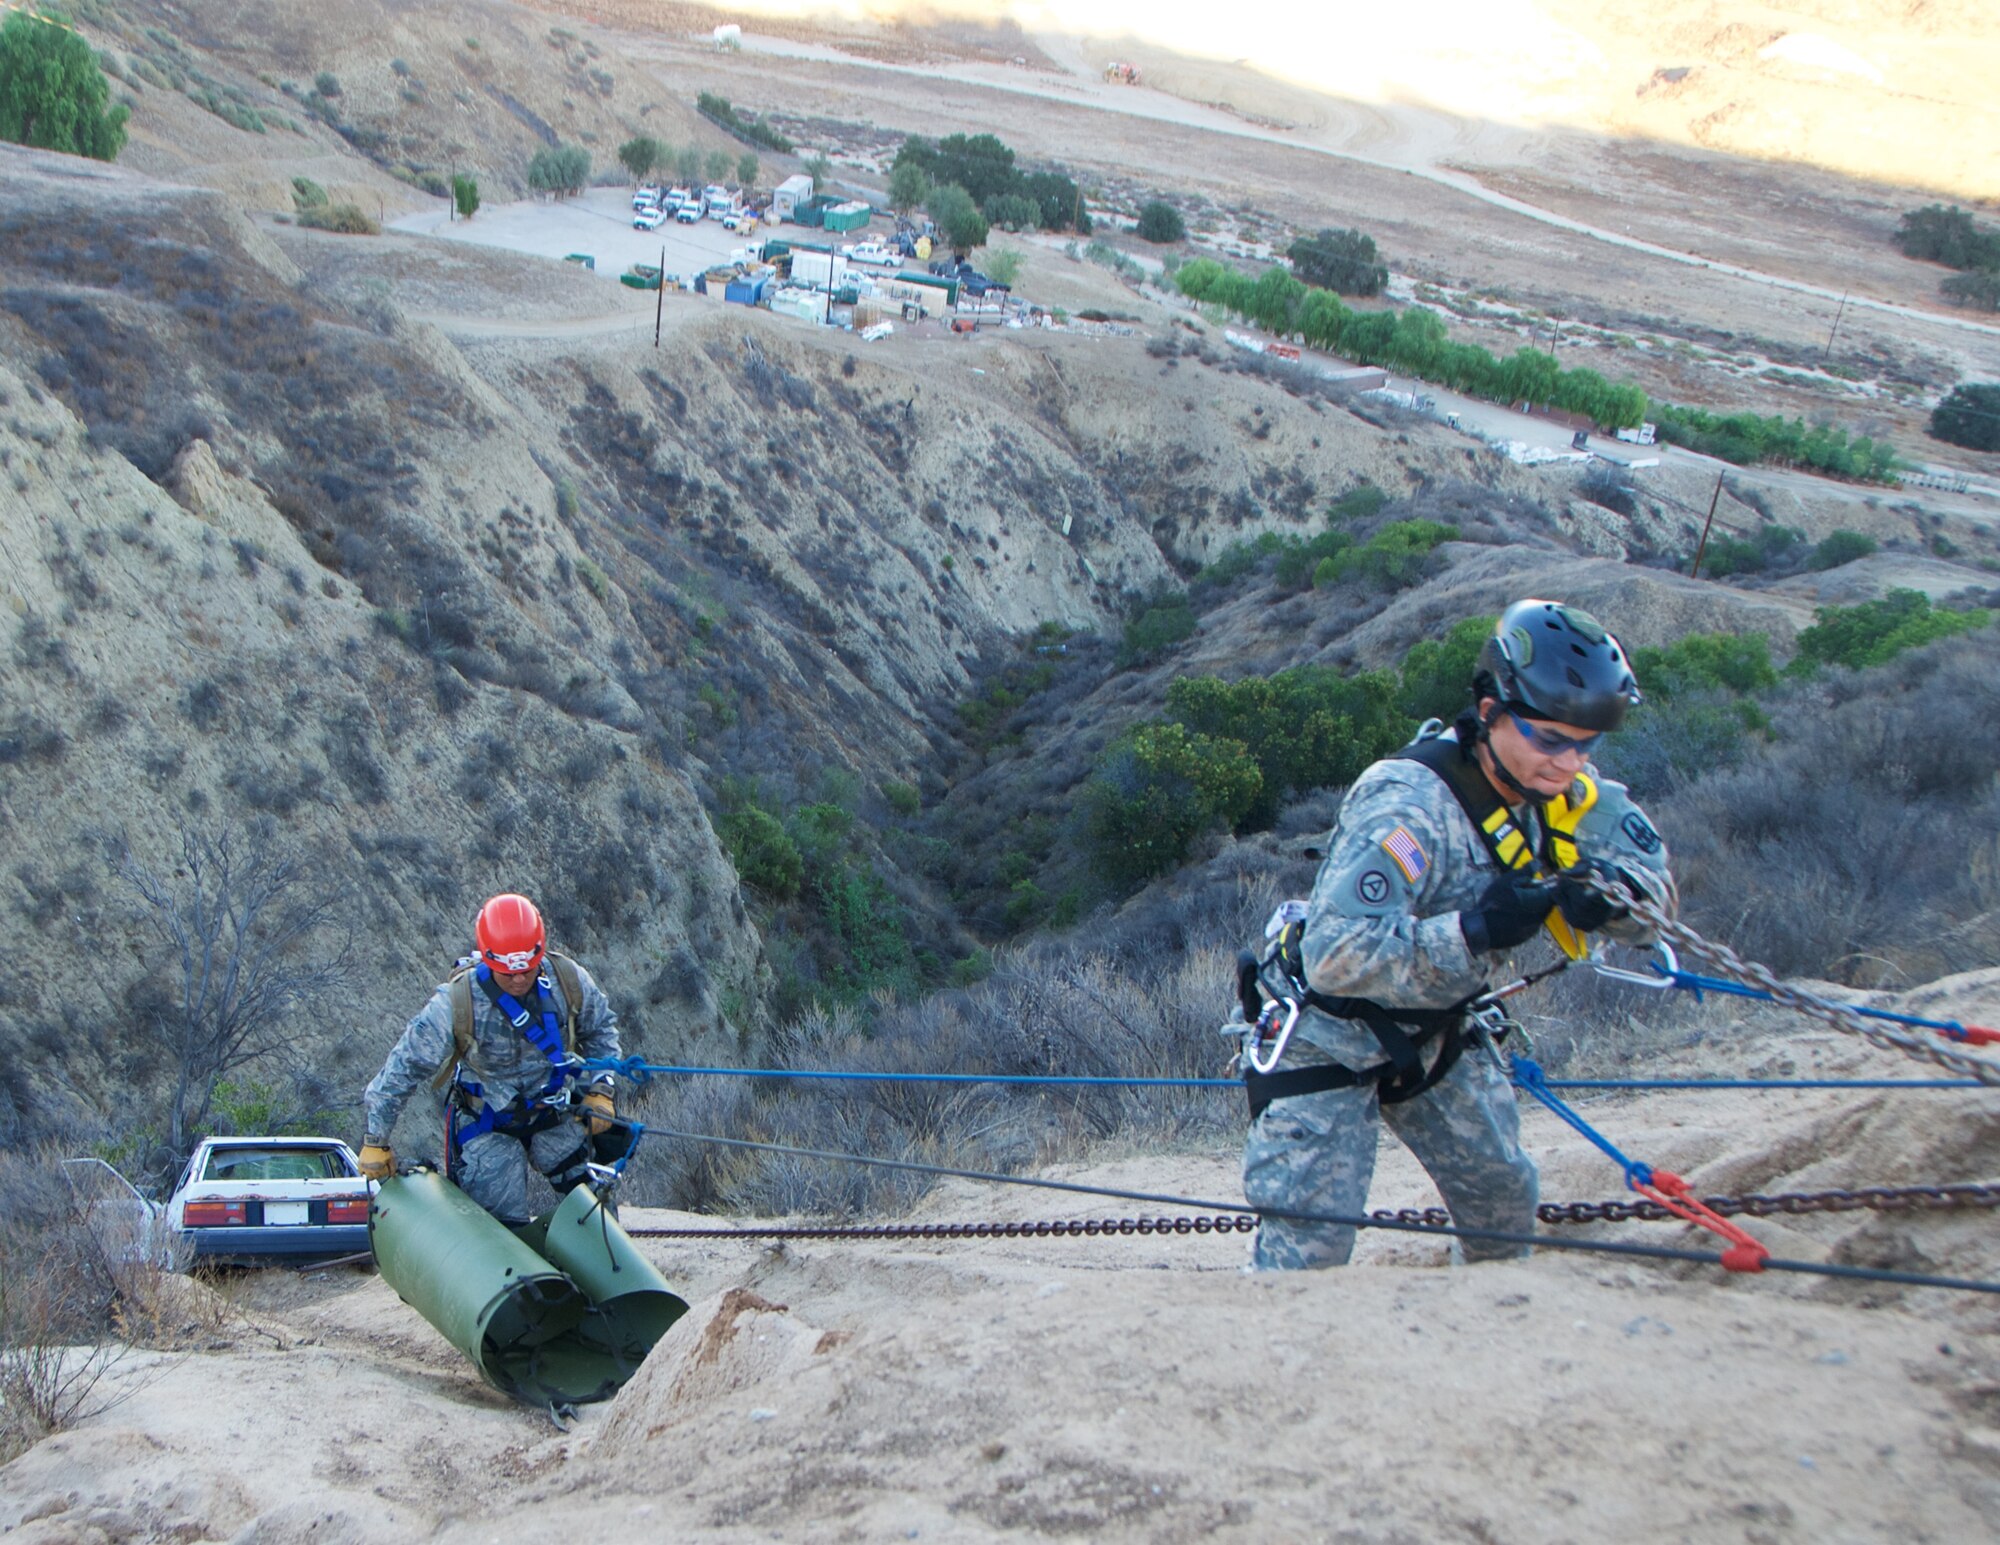 A Hawaii Air Natioanl Guard Airmen and Hawaii Army National Guard Soldier repel down a cliff to a car wreck prop during a cliff rescue scenario at Exercise Vigilant Guard 2017, Delle Valle Regional Center, California, Nov. 17, 2016. The service members are part of a Hawaii Natonal Guard team that focuses on emergency response. Vigilant Guard is an exercise program sponsored by United States Northern Command in conjunction with National Guard Bureau to provide State National Guards an opportunity to improve cooperation and relationships with their regional civilian, military, and federal partners in preparation for emergencies and catastrophic events. (U.S. Air National Guard photo by Senior Airman Orlando Corpuz) 